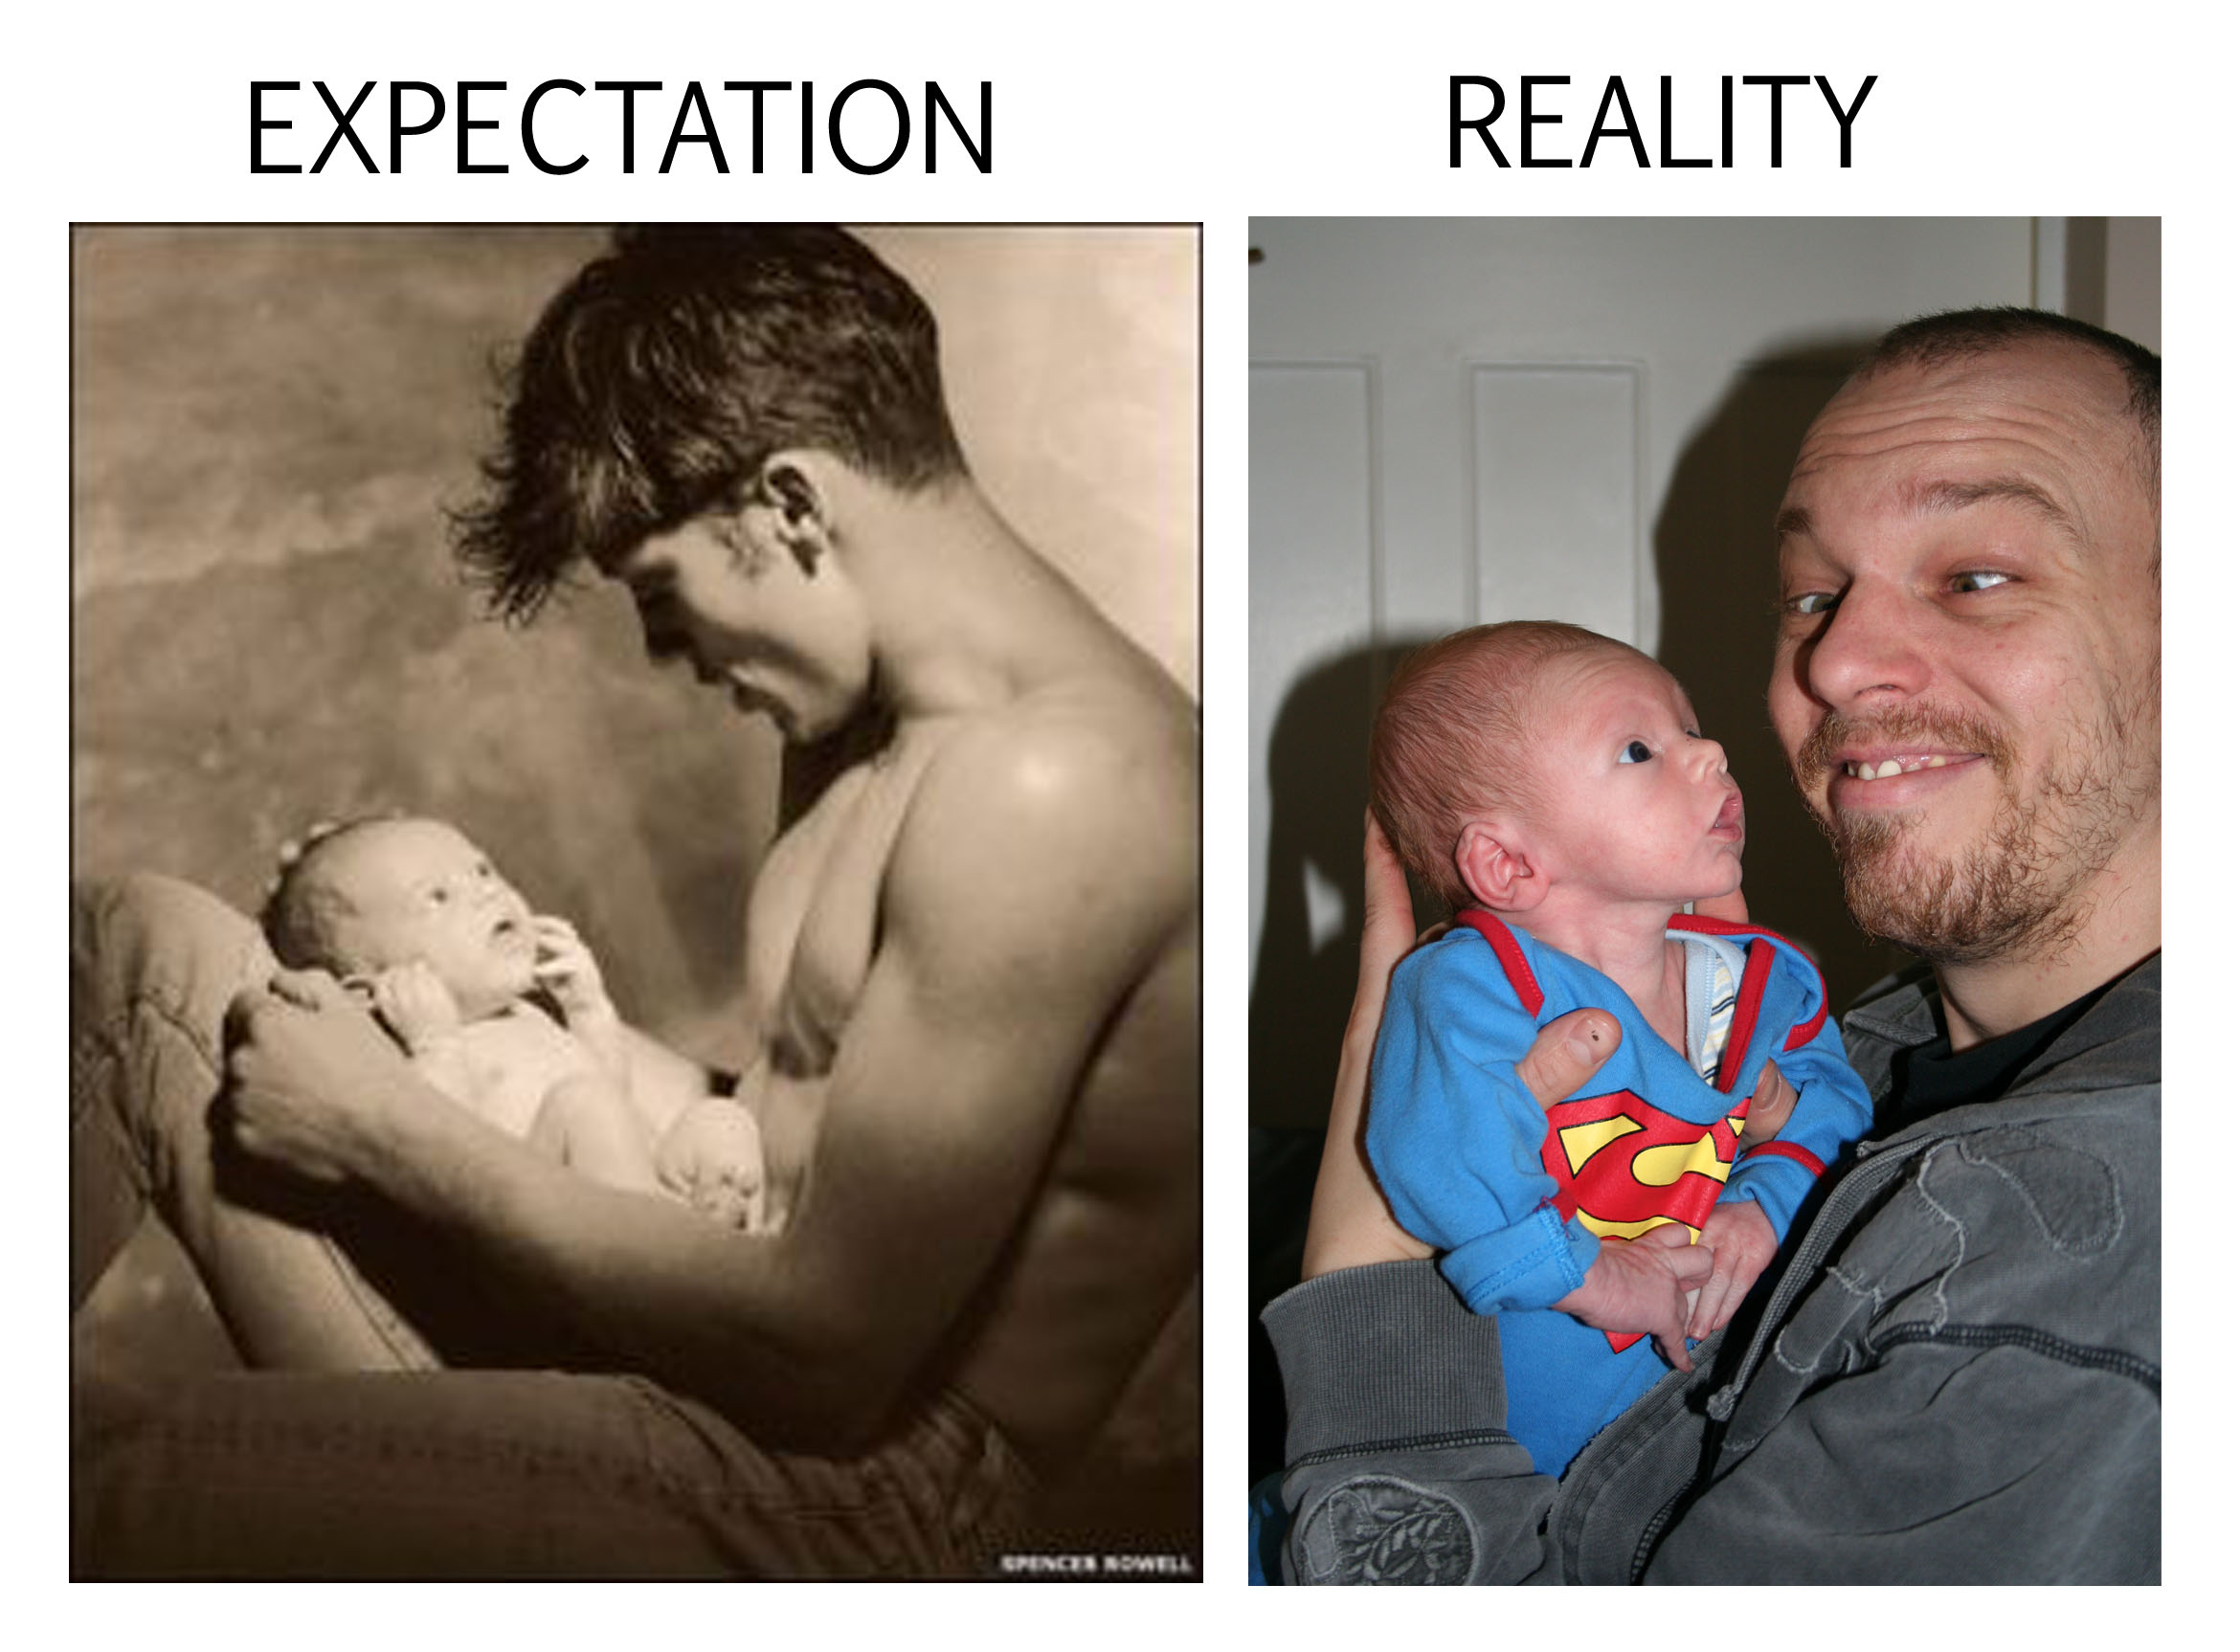 It's too much to ask for an 'arty' photo of your spouse and new baby